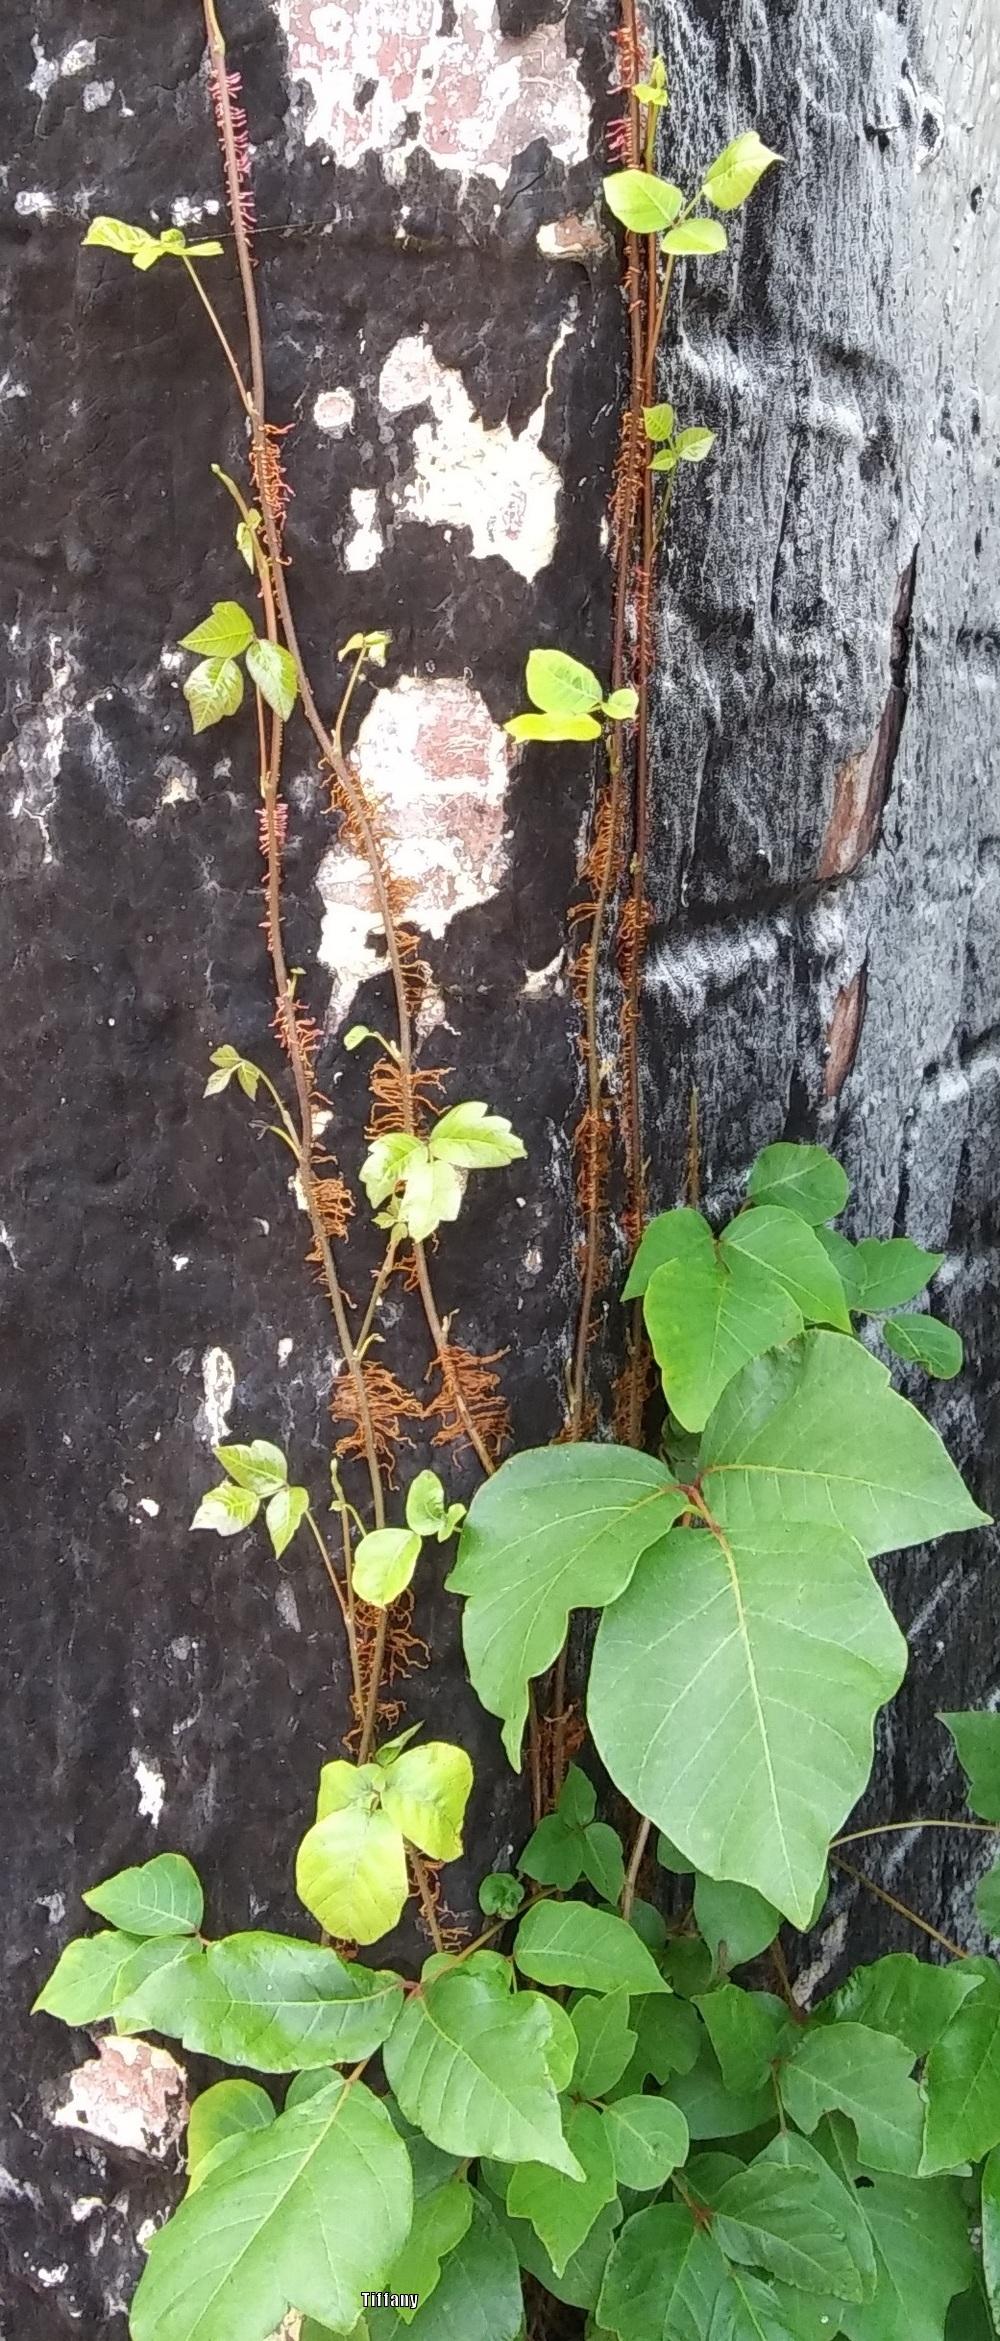 Photo of Poison Ivy (Toxicodendron radicans) uploaded by purpleinopp